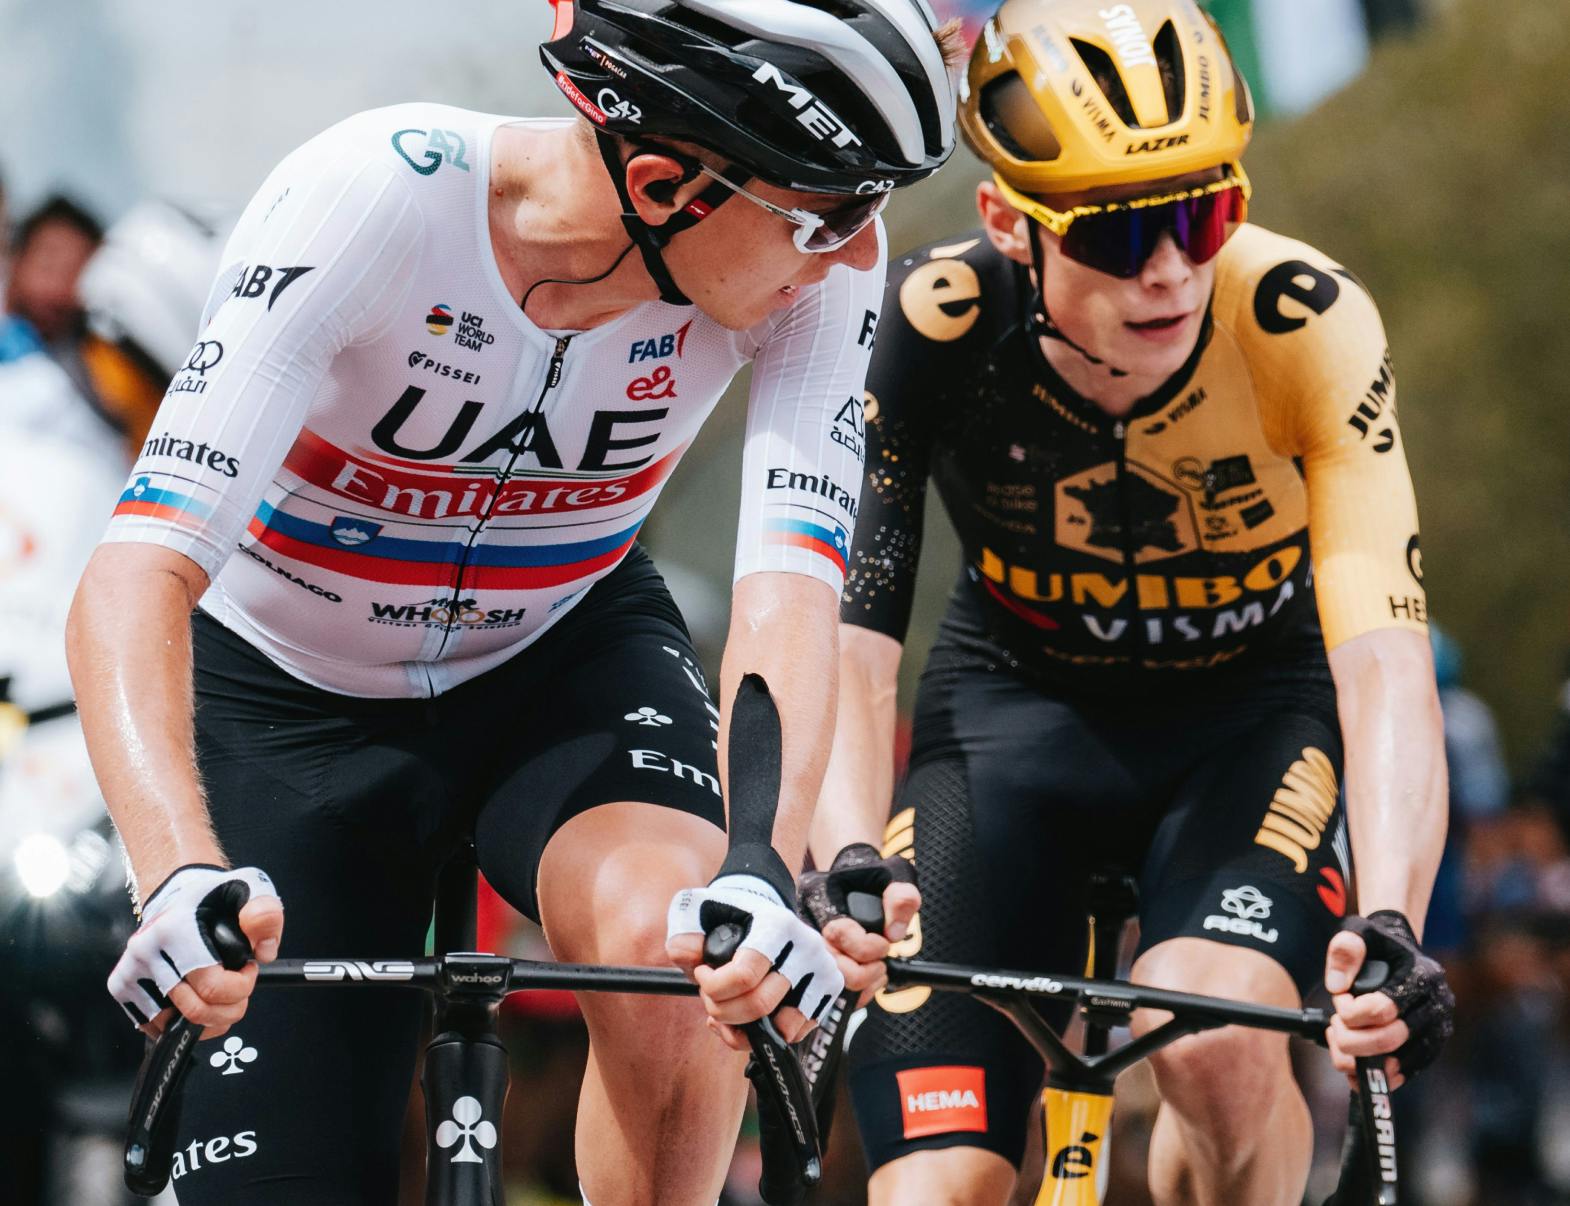 Jonas Vingegaard and Tadej Pogacar riding next to each other at the Tour de France.